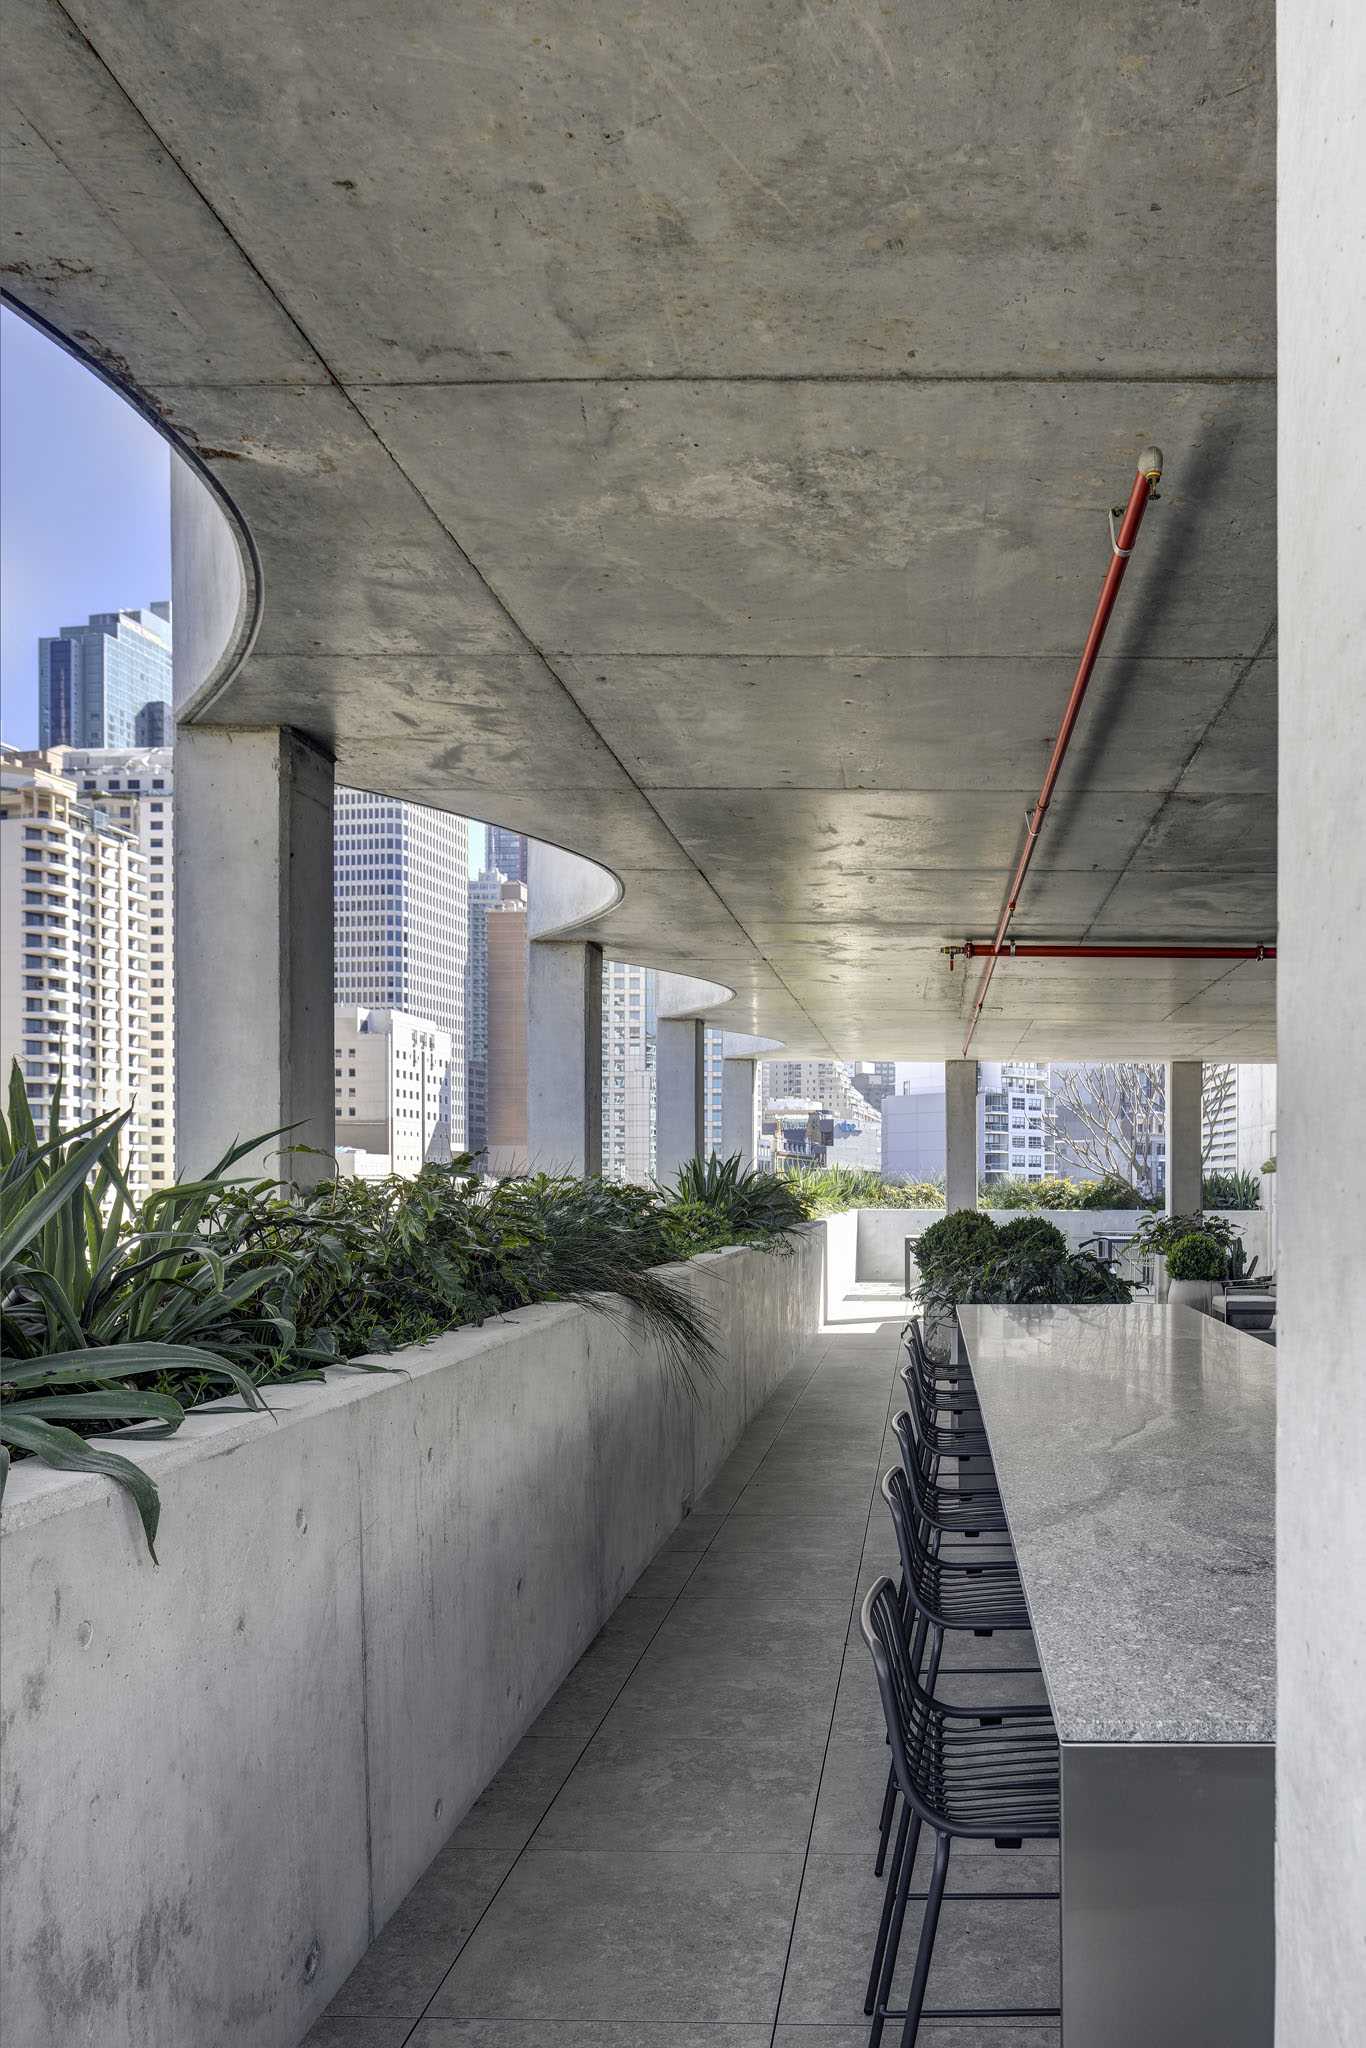 A rooftop patio with built-in concrete planters wrapping around the exterior.